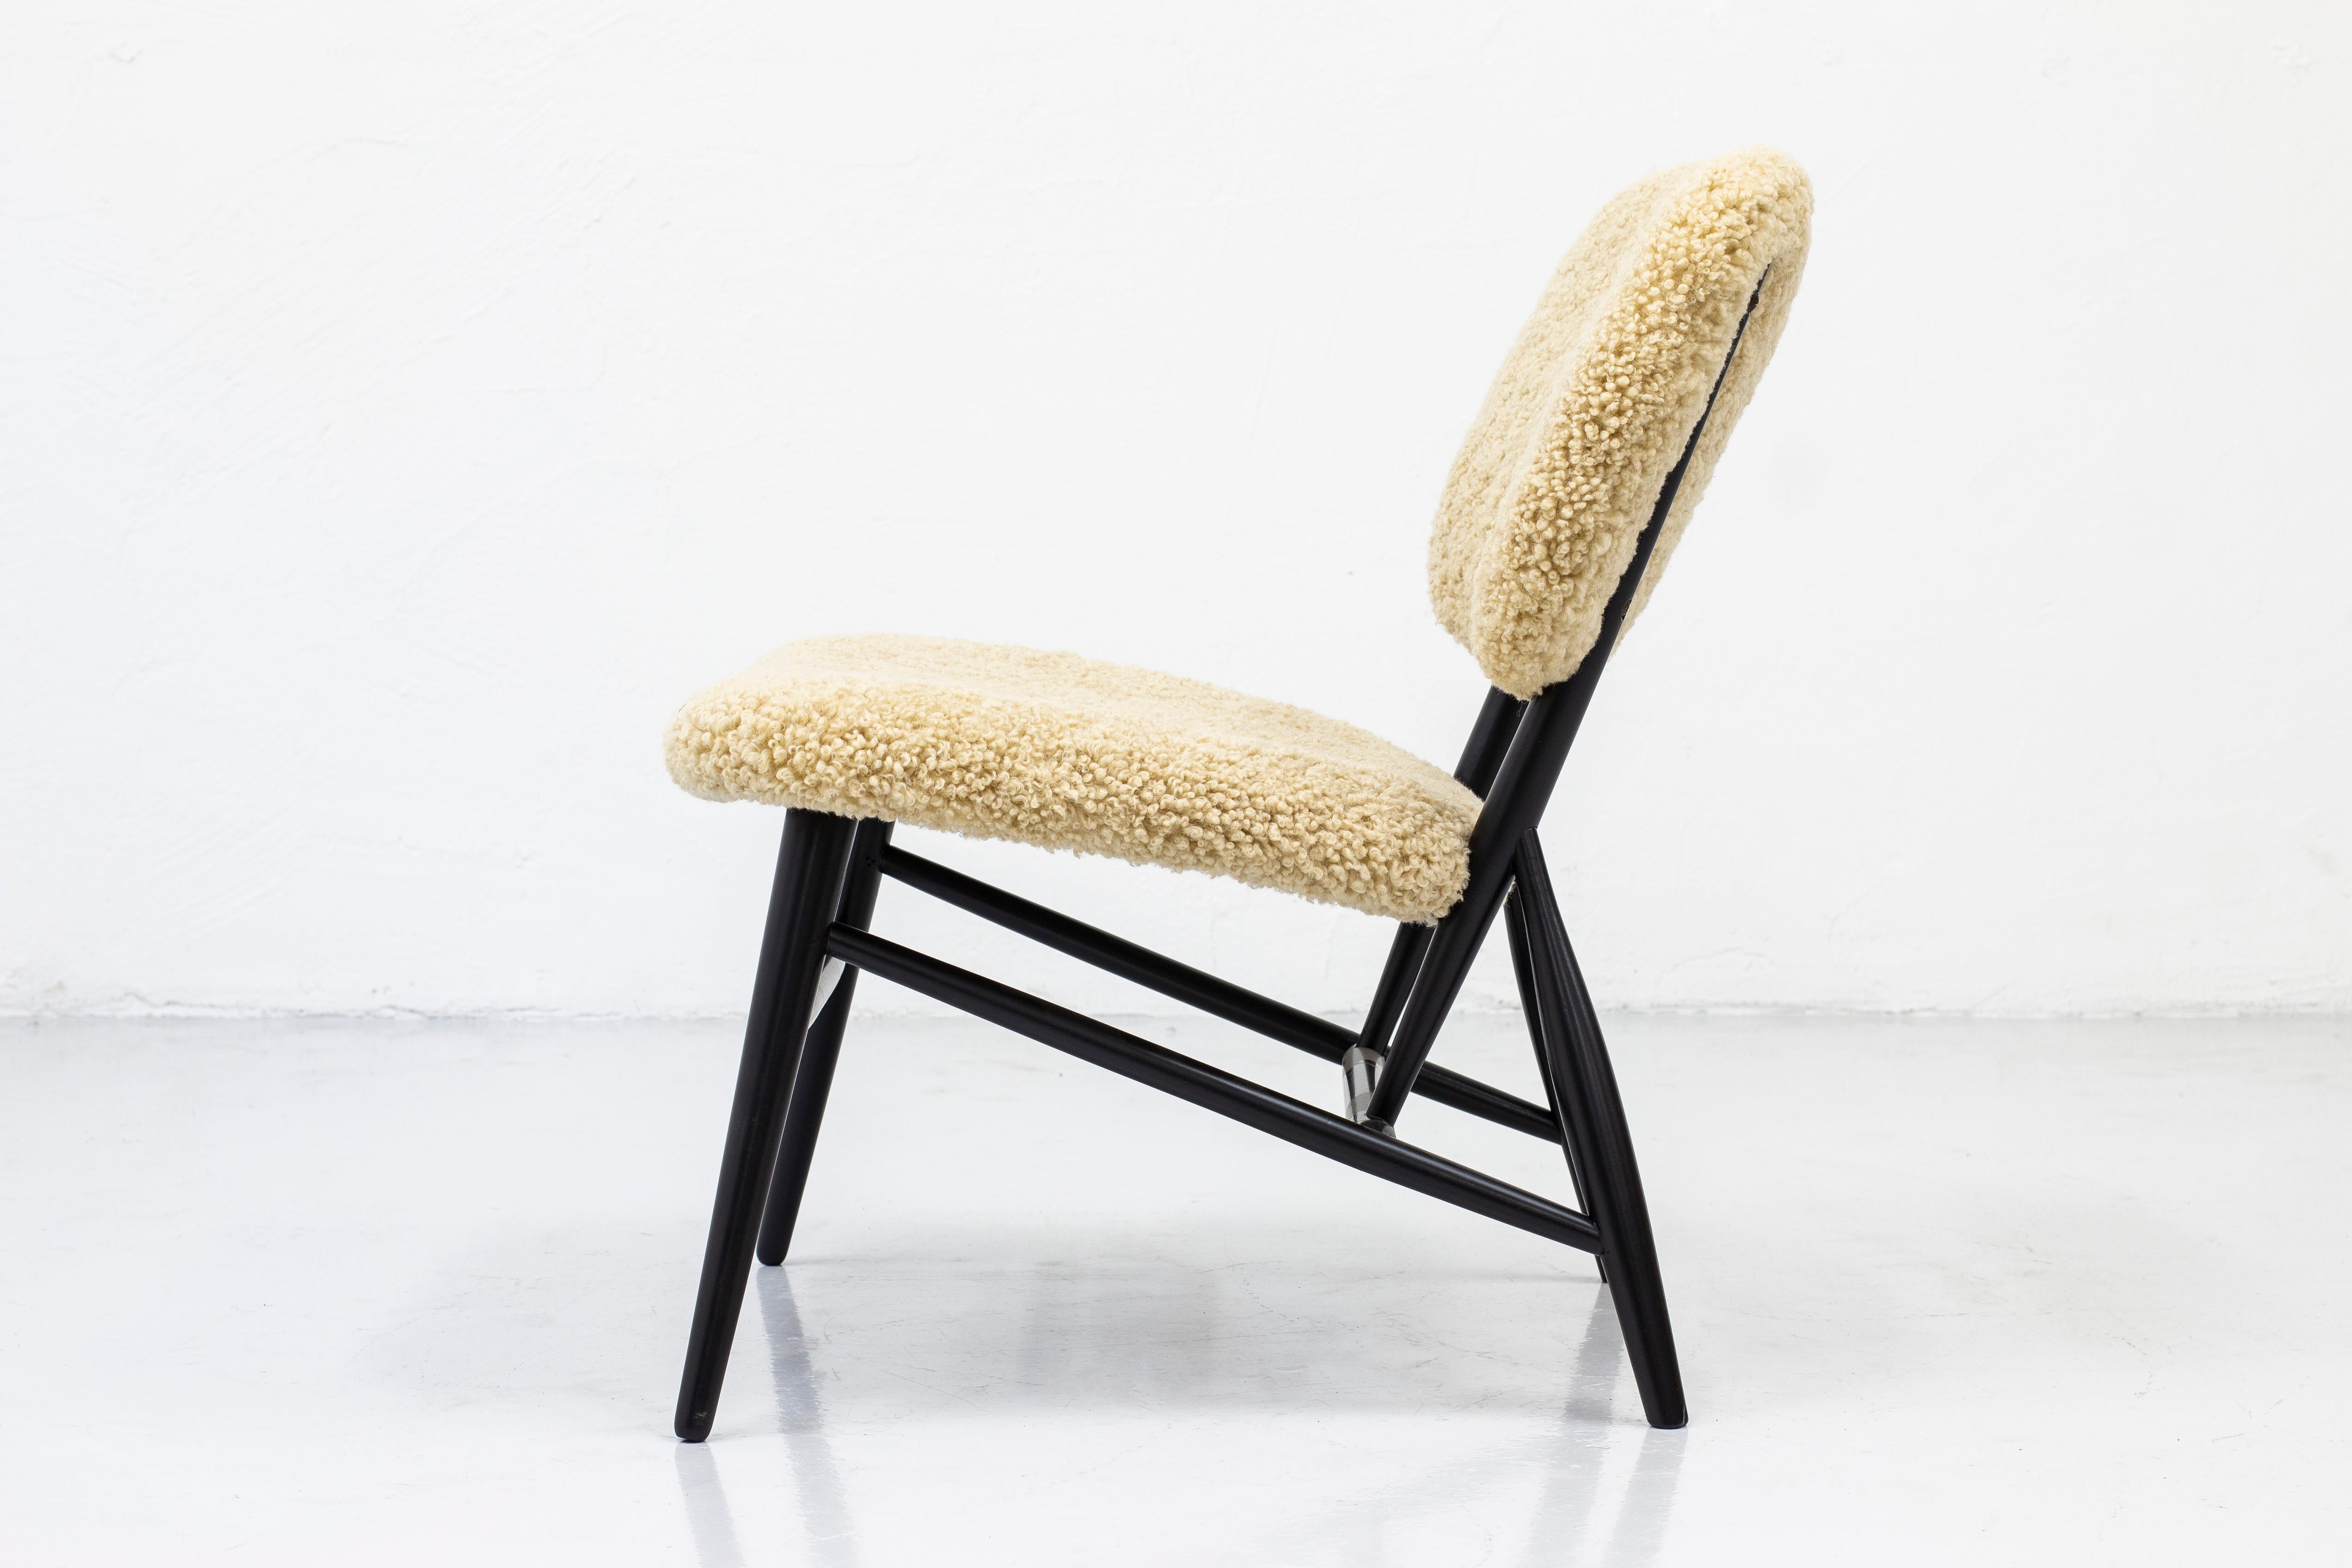 Swedish Lounge Chair with Sheep Skin by Slöjd & Möbler, in the Manner of Alf Svensson